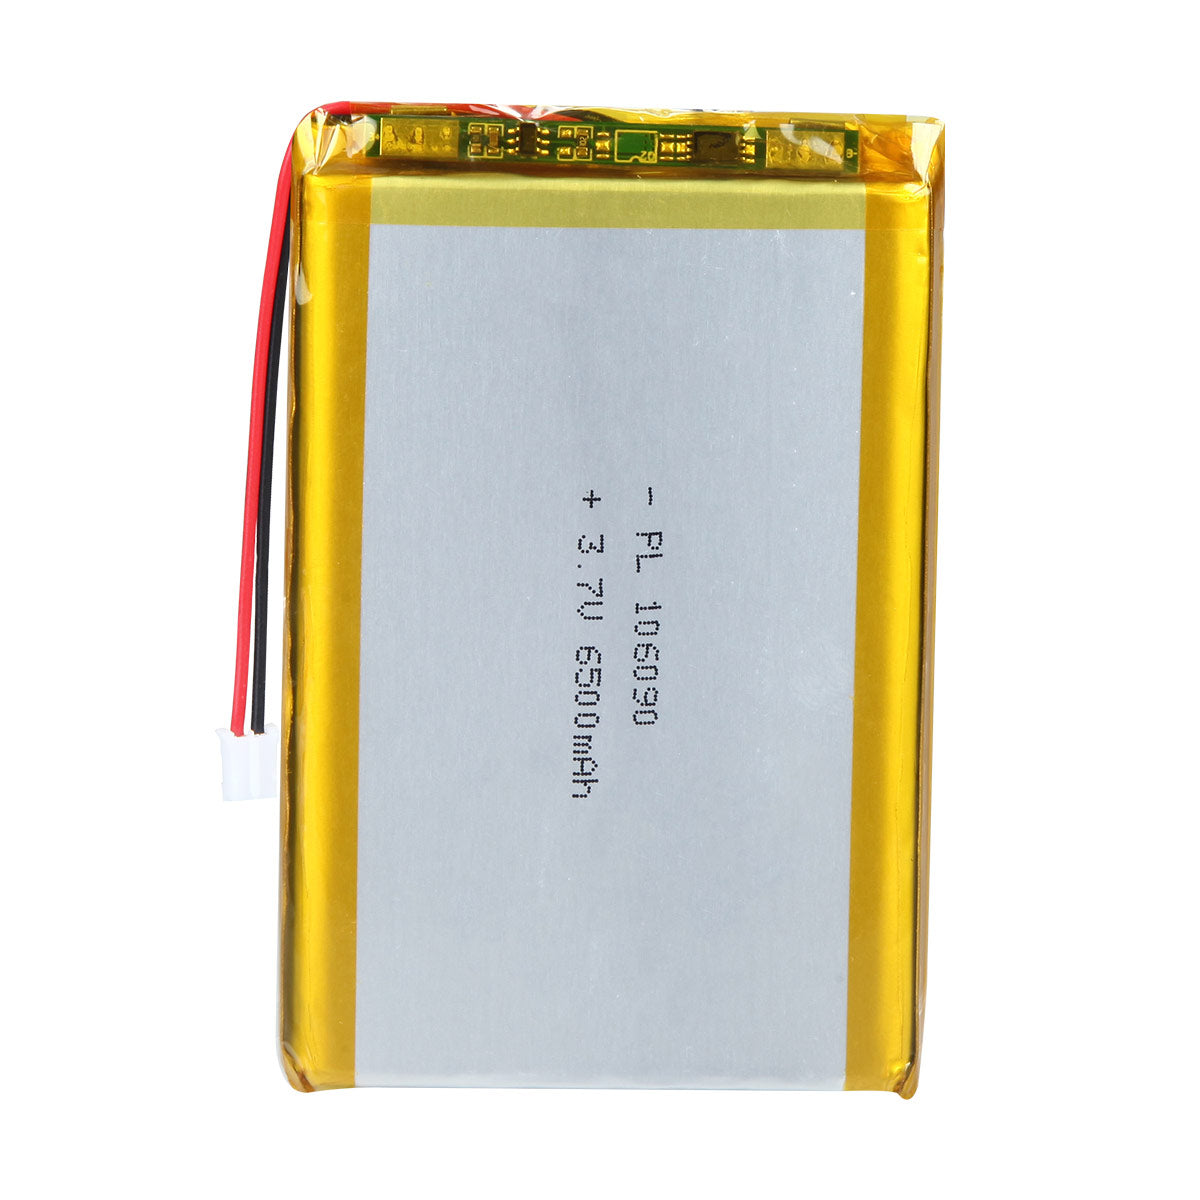 YDL 3.7V 6500mAh 106090 Rechargeable Lithium Polymer Battery Length 92mm